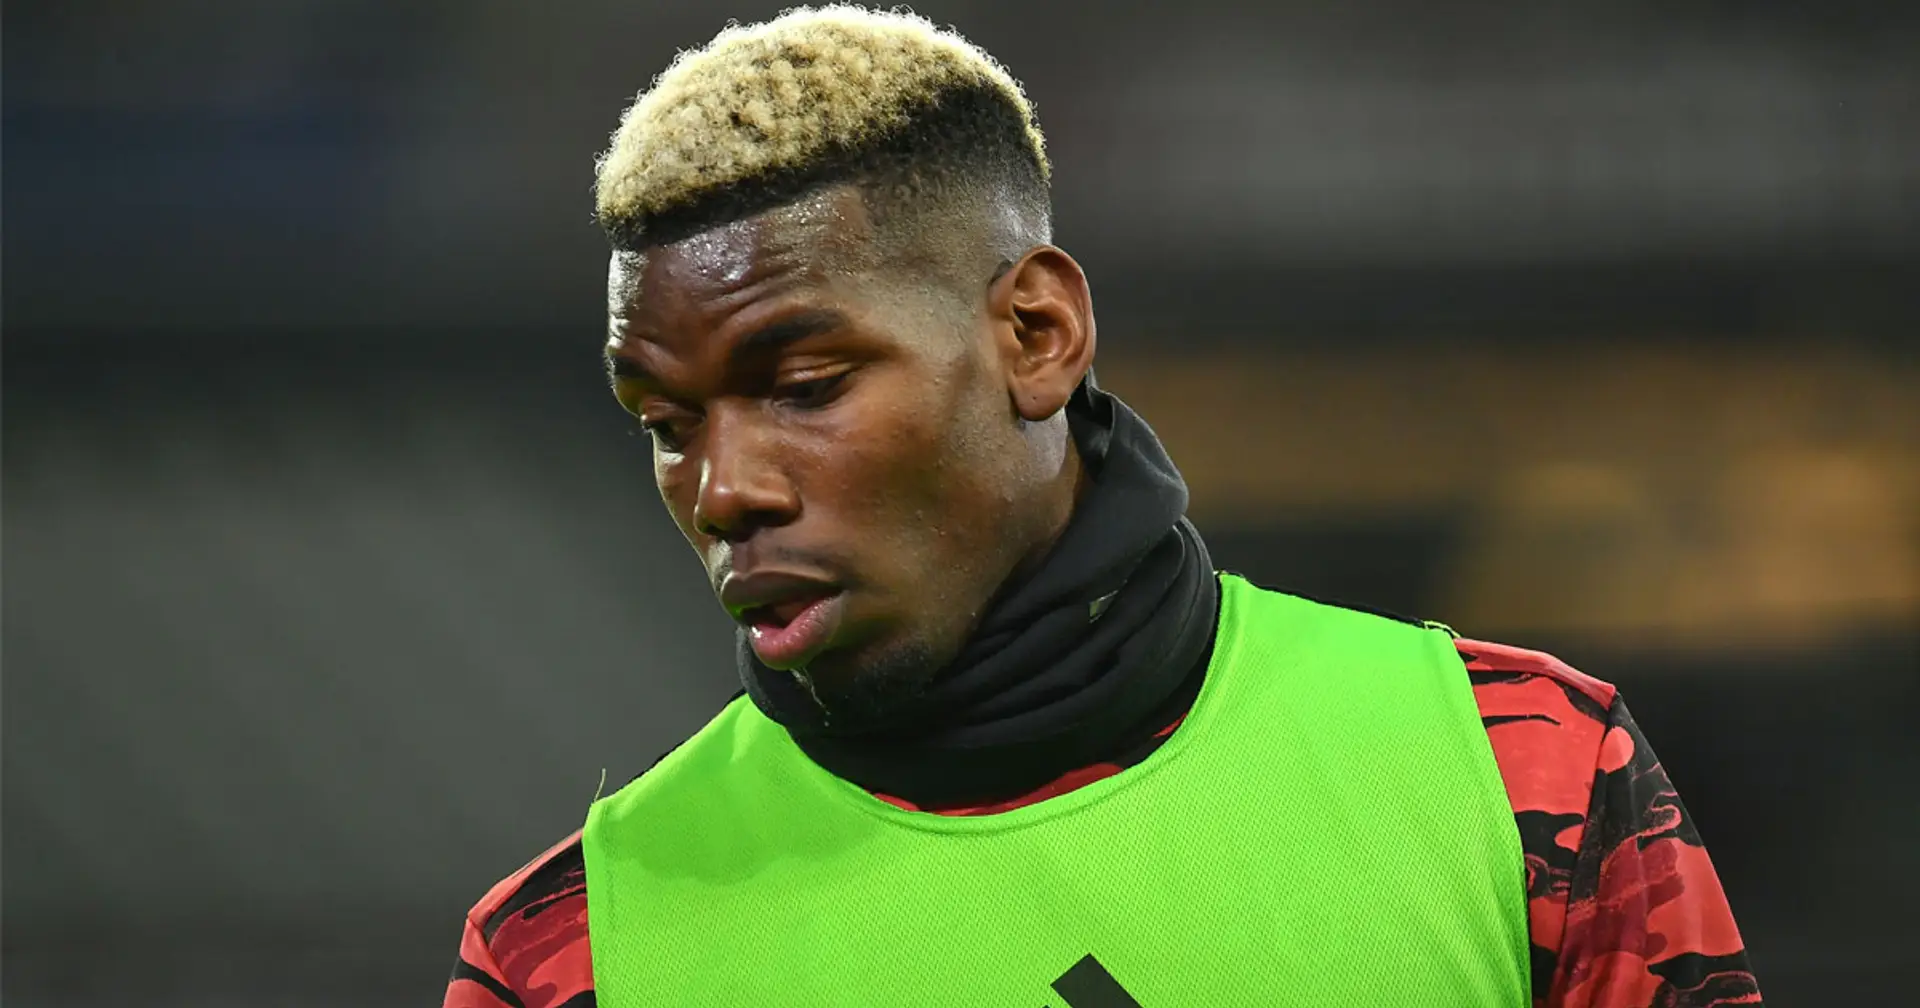 ‘I get tired and am out of breath really fast’: Pogba explains how Covid-19 affected his performances